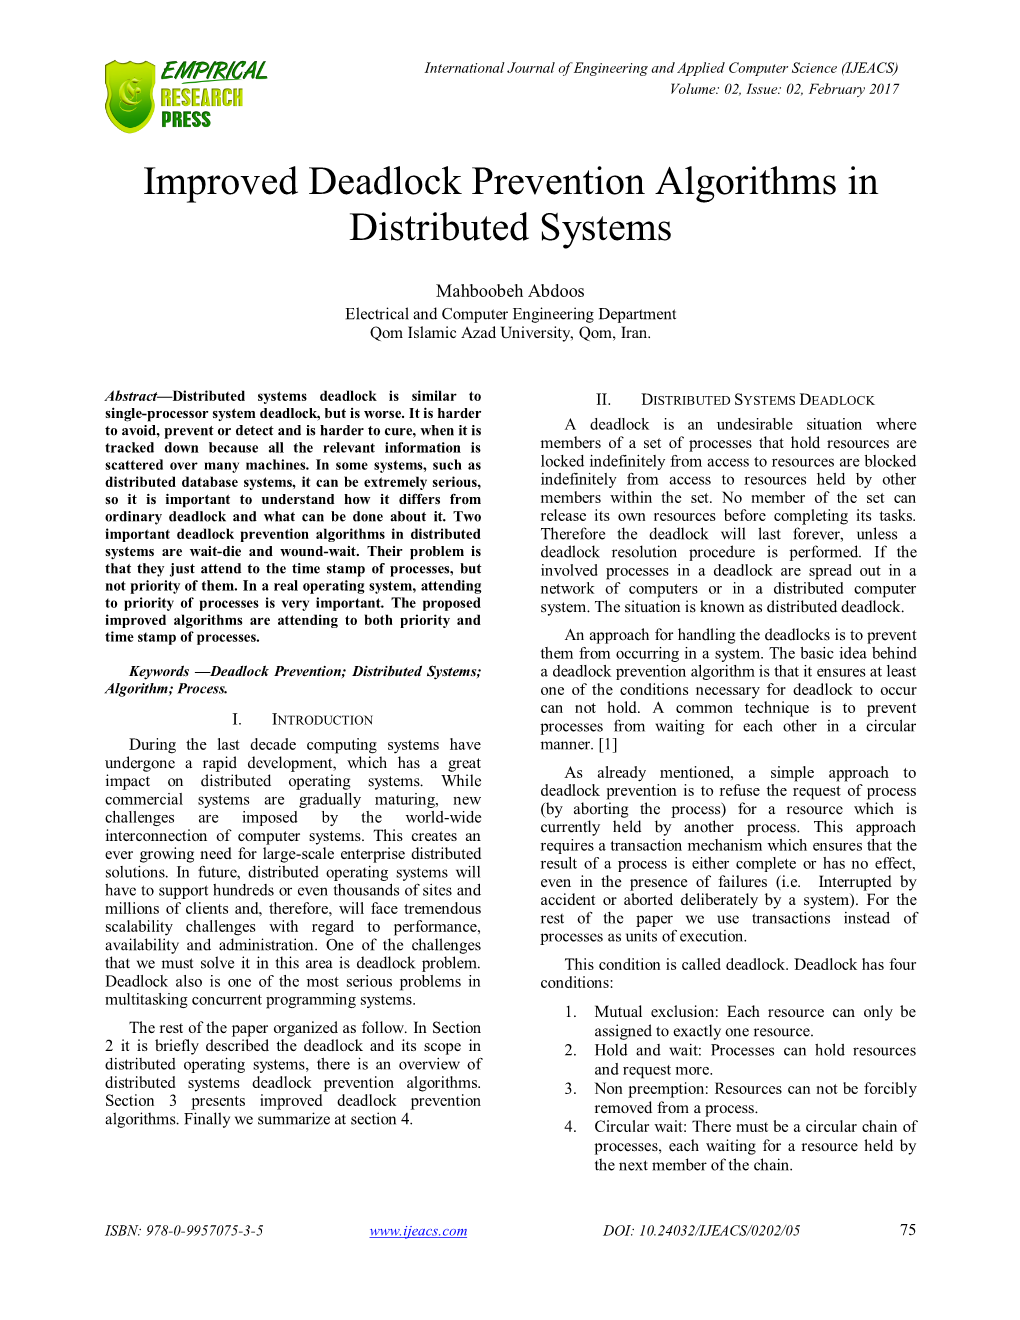 Improved Deadlock Prevention Algorithms in Distributed Systems